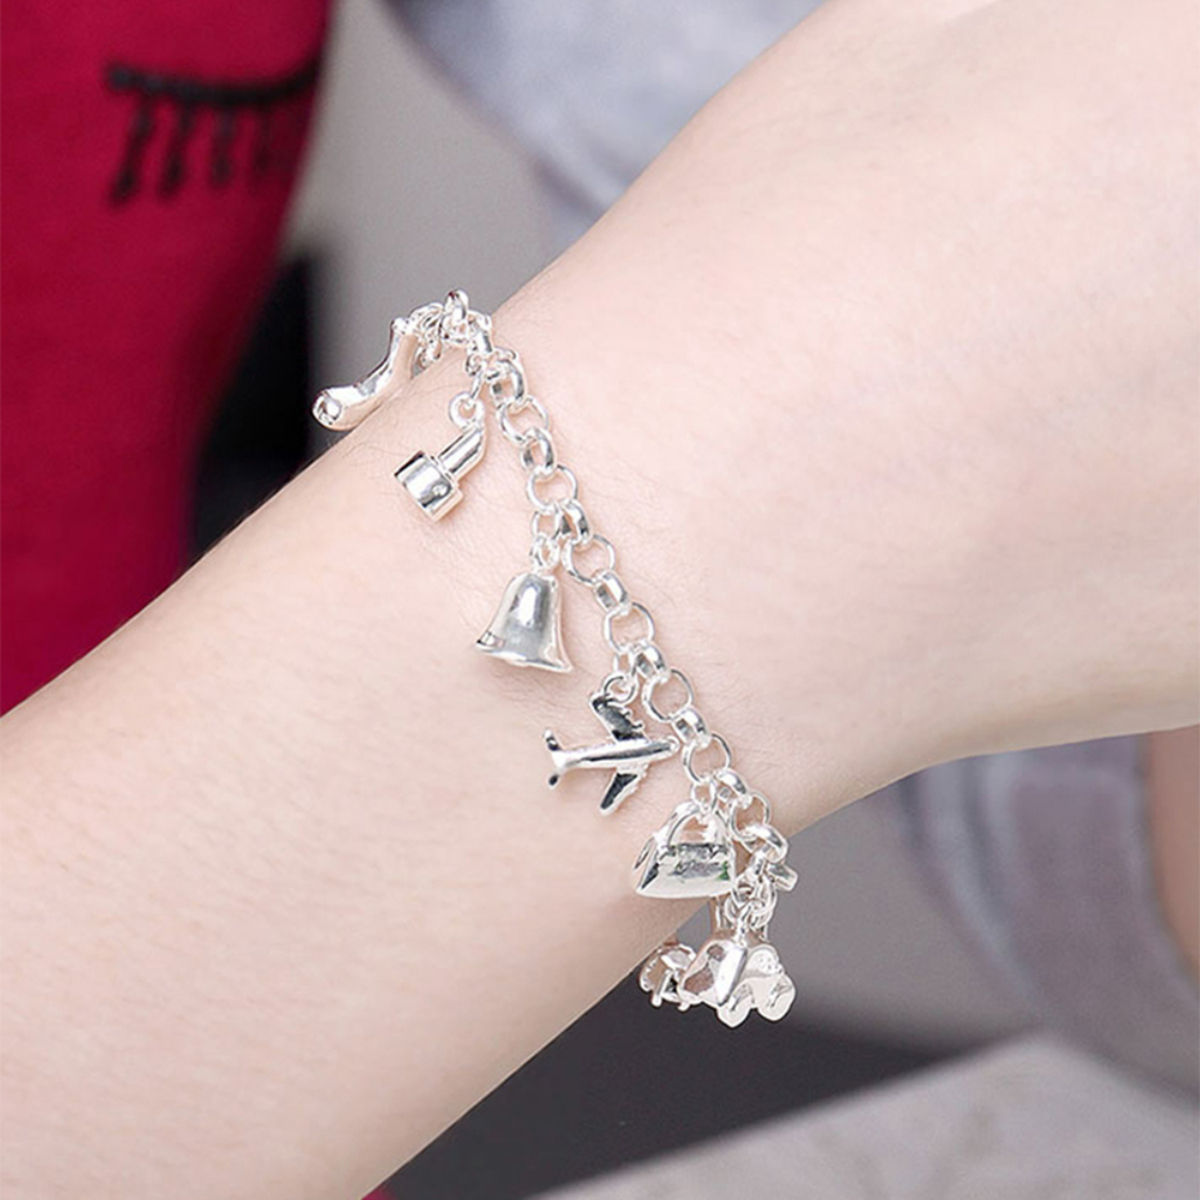 Yellow Chimes Women SilverPlated Charm Bracelet Buy Yellow Chimes Women  SilverPlated Charm Bracelet Online at Best Price in India  Nykaa